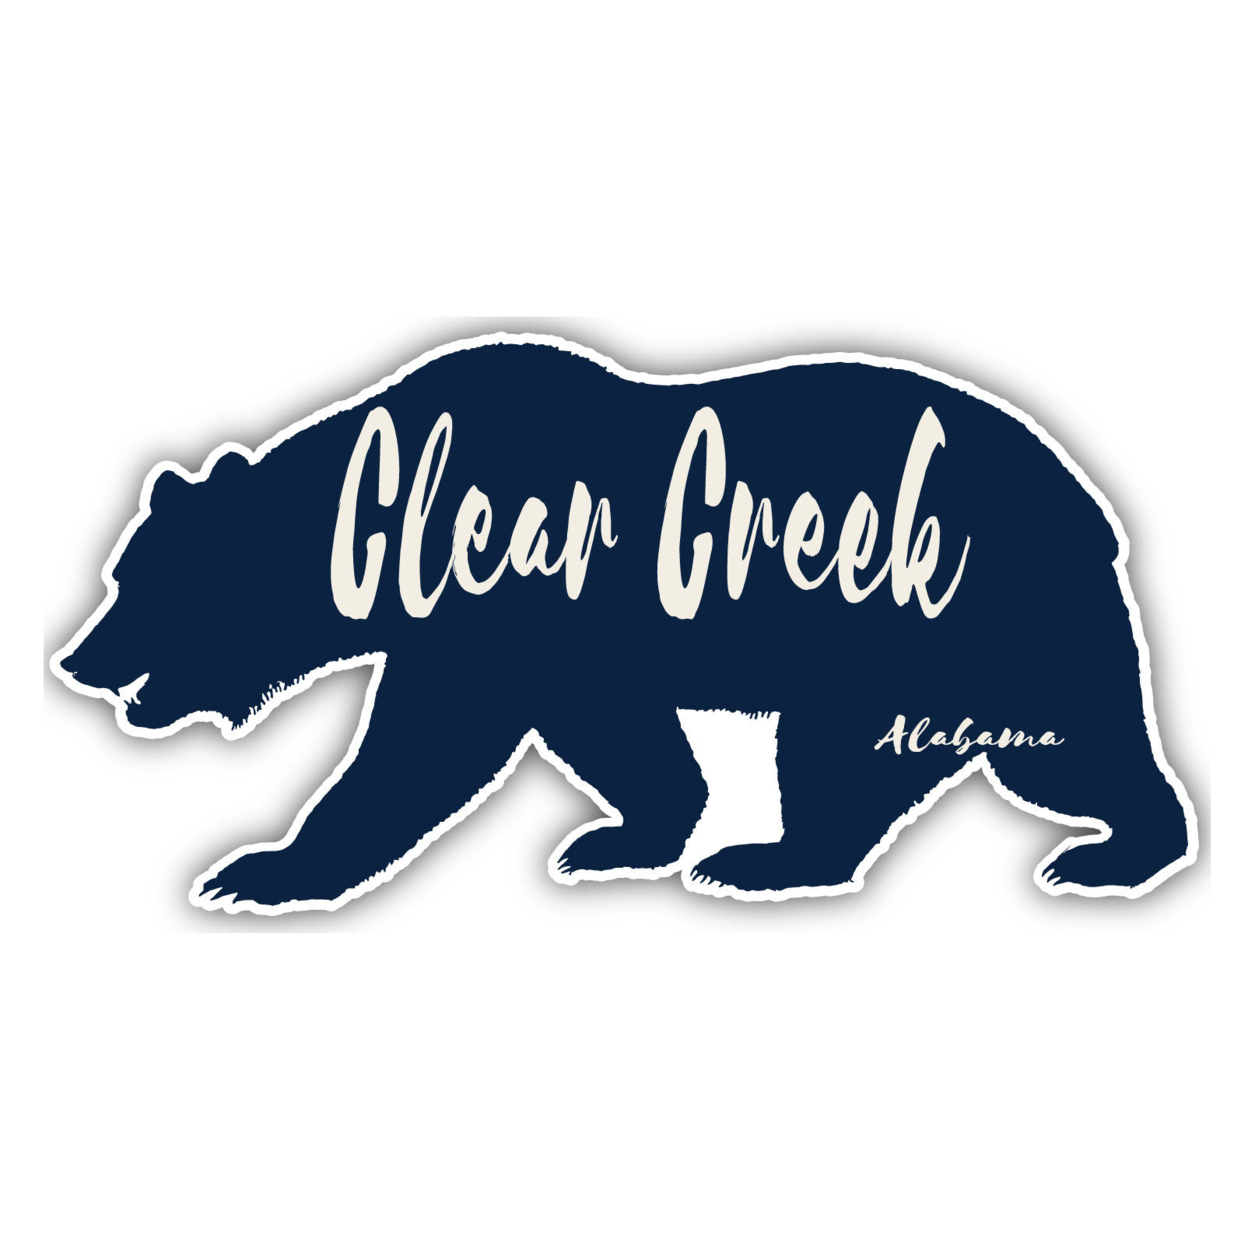 Clear Creek Alabama Souvenir Decorative Stickers (Choose Theme And Size) - 4-Pack, 8-Inch, Adventures Awaits